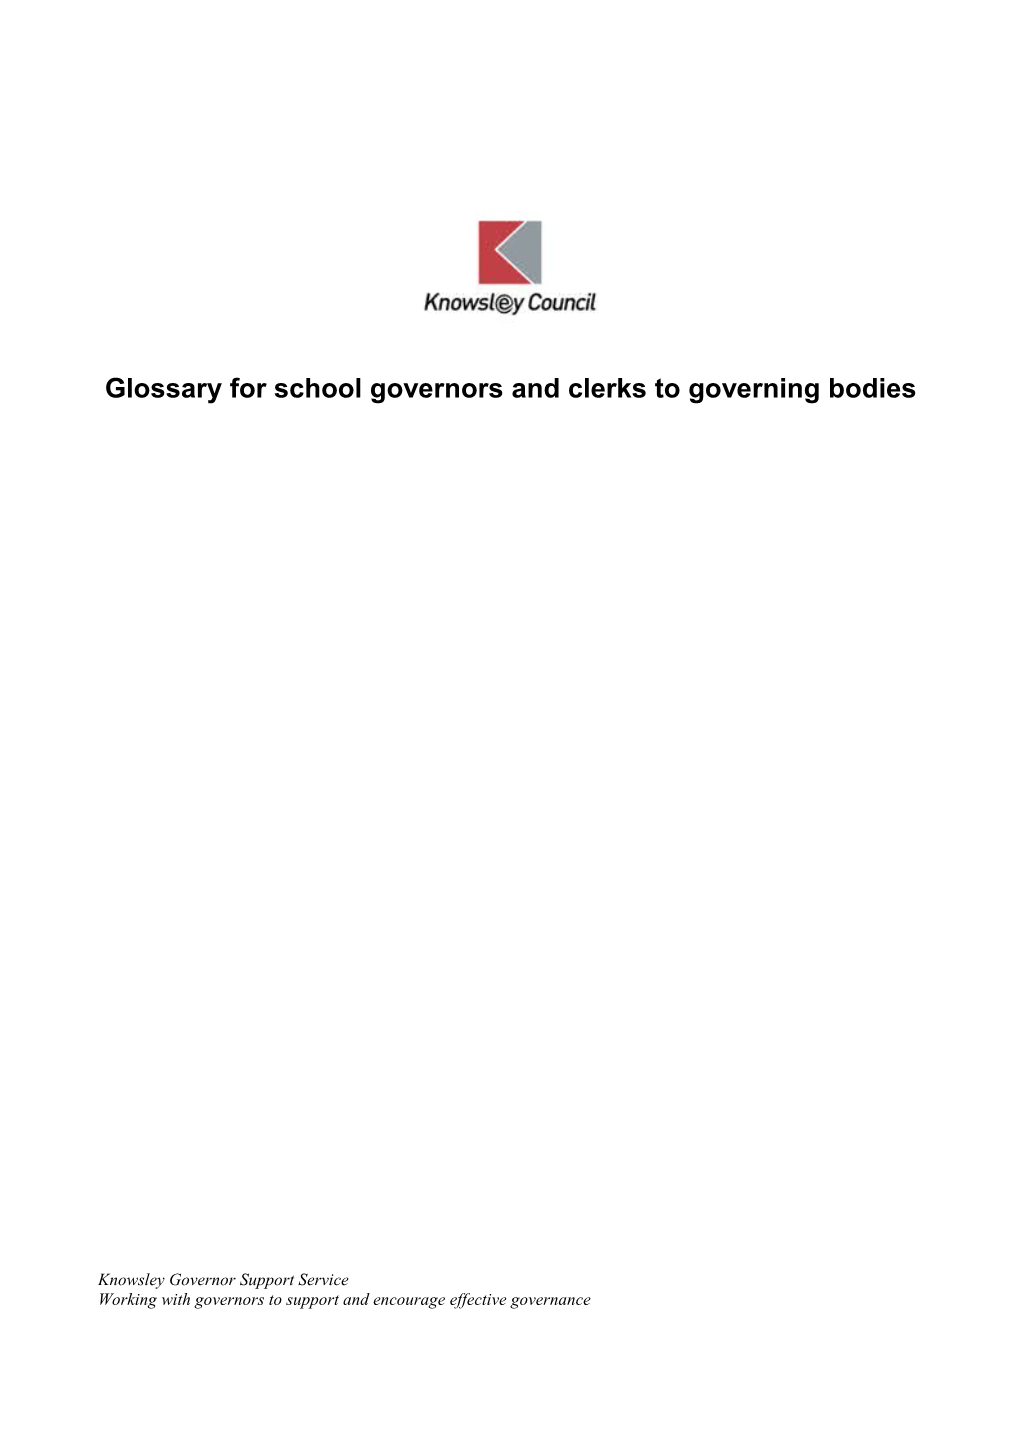 This Glossary Is Intended to Help Governors to Understand the Terminology Used in Education